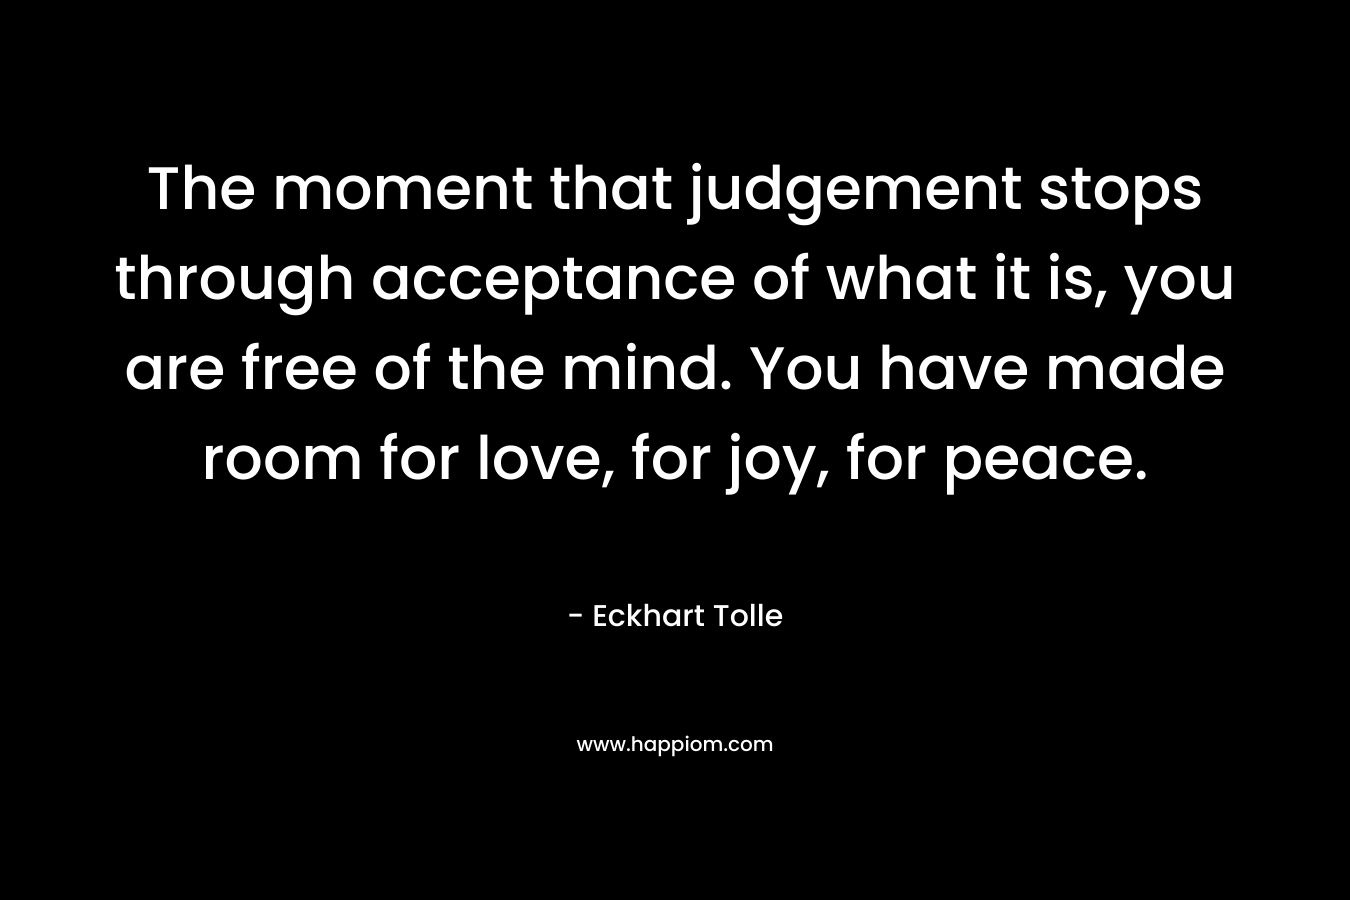 The moment that judgement stops through acceptance of what it is, you are free of the mind. You have made room for love, for joy, for peace.